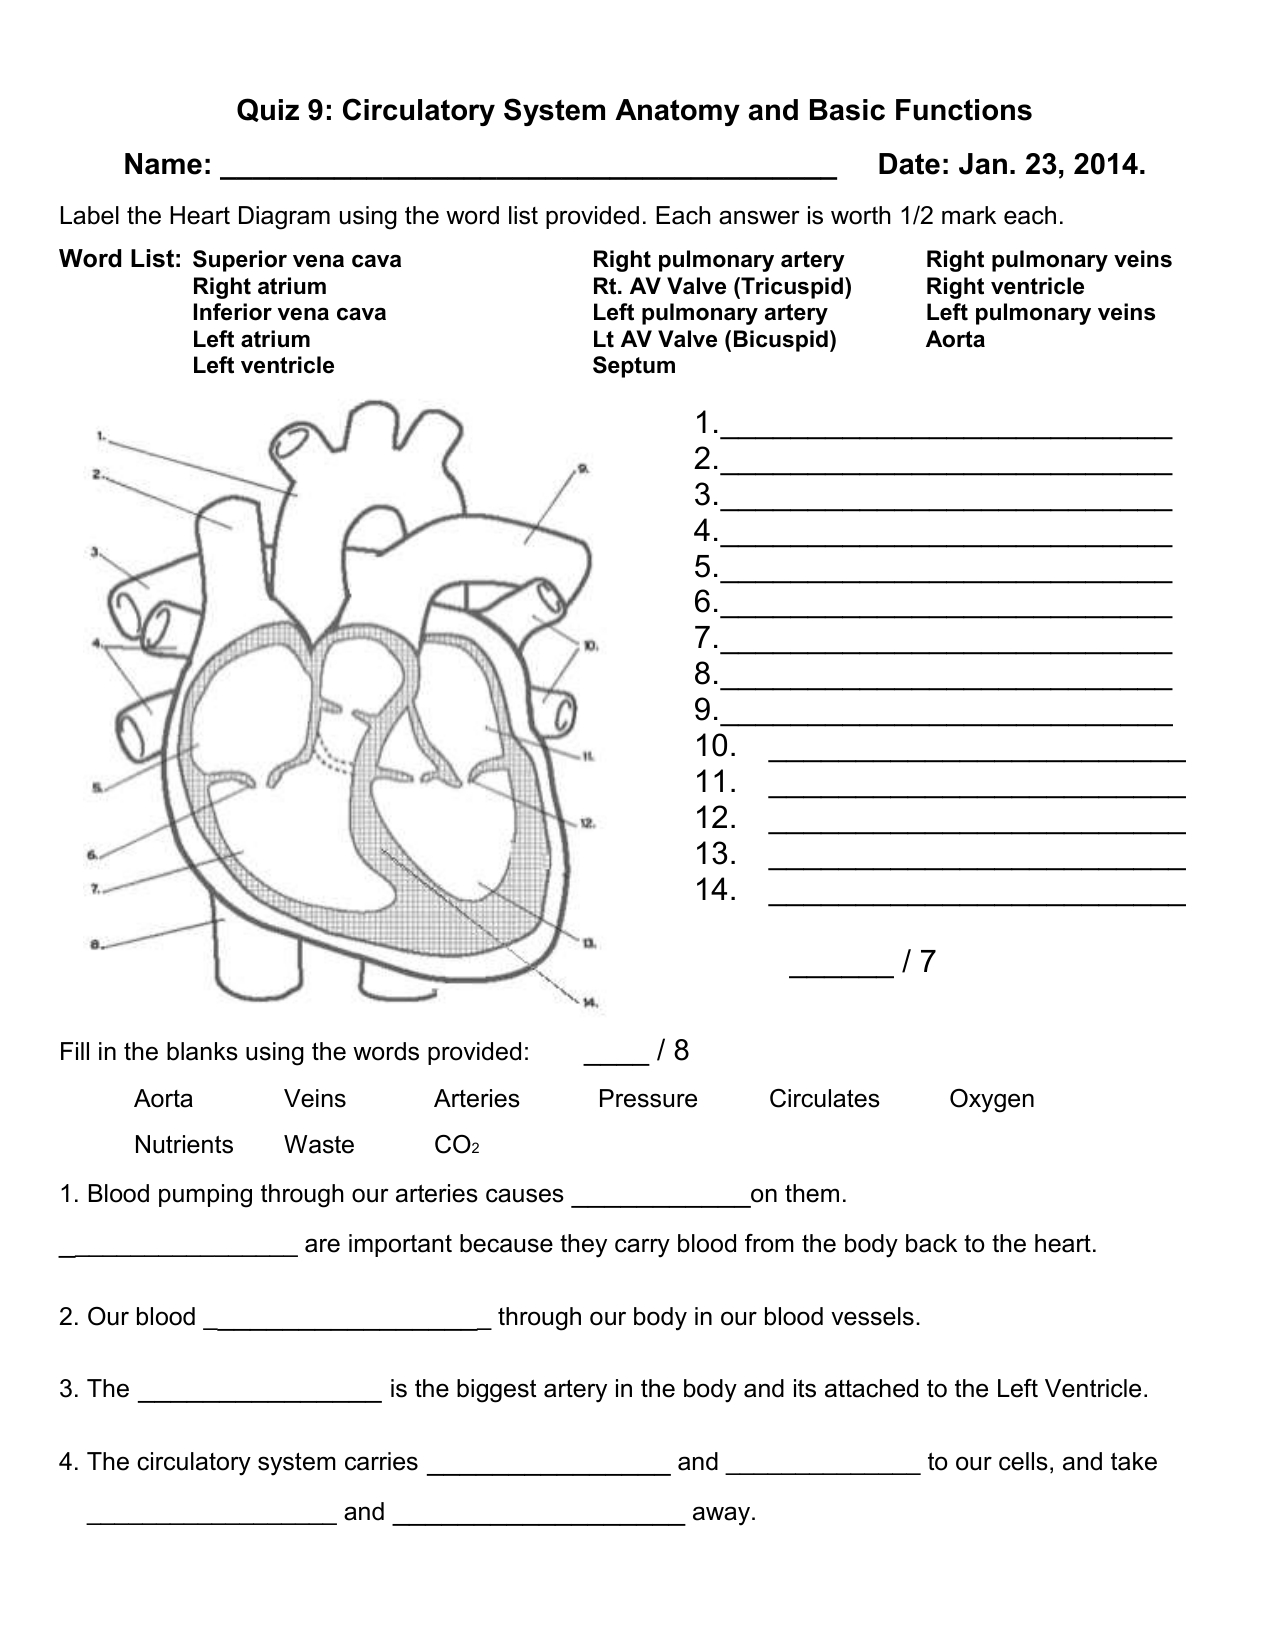 circulatory-system-gizmo-worksheet-answers-herbality